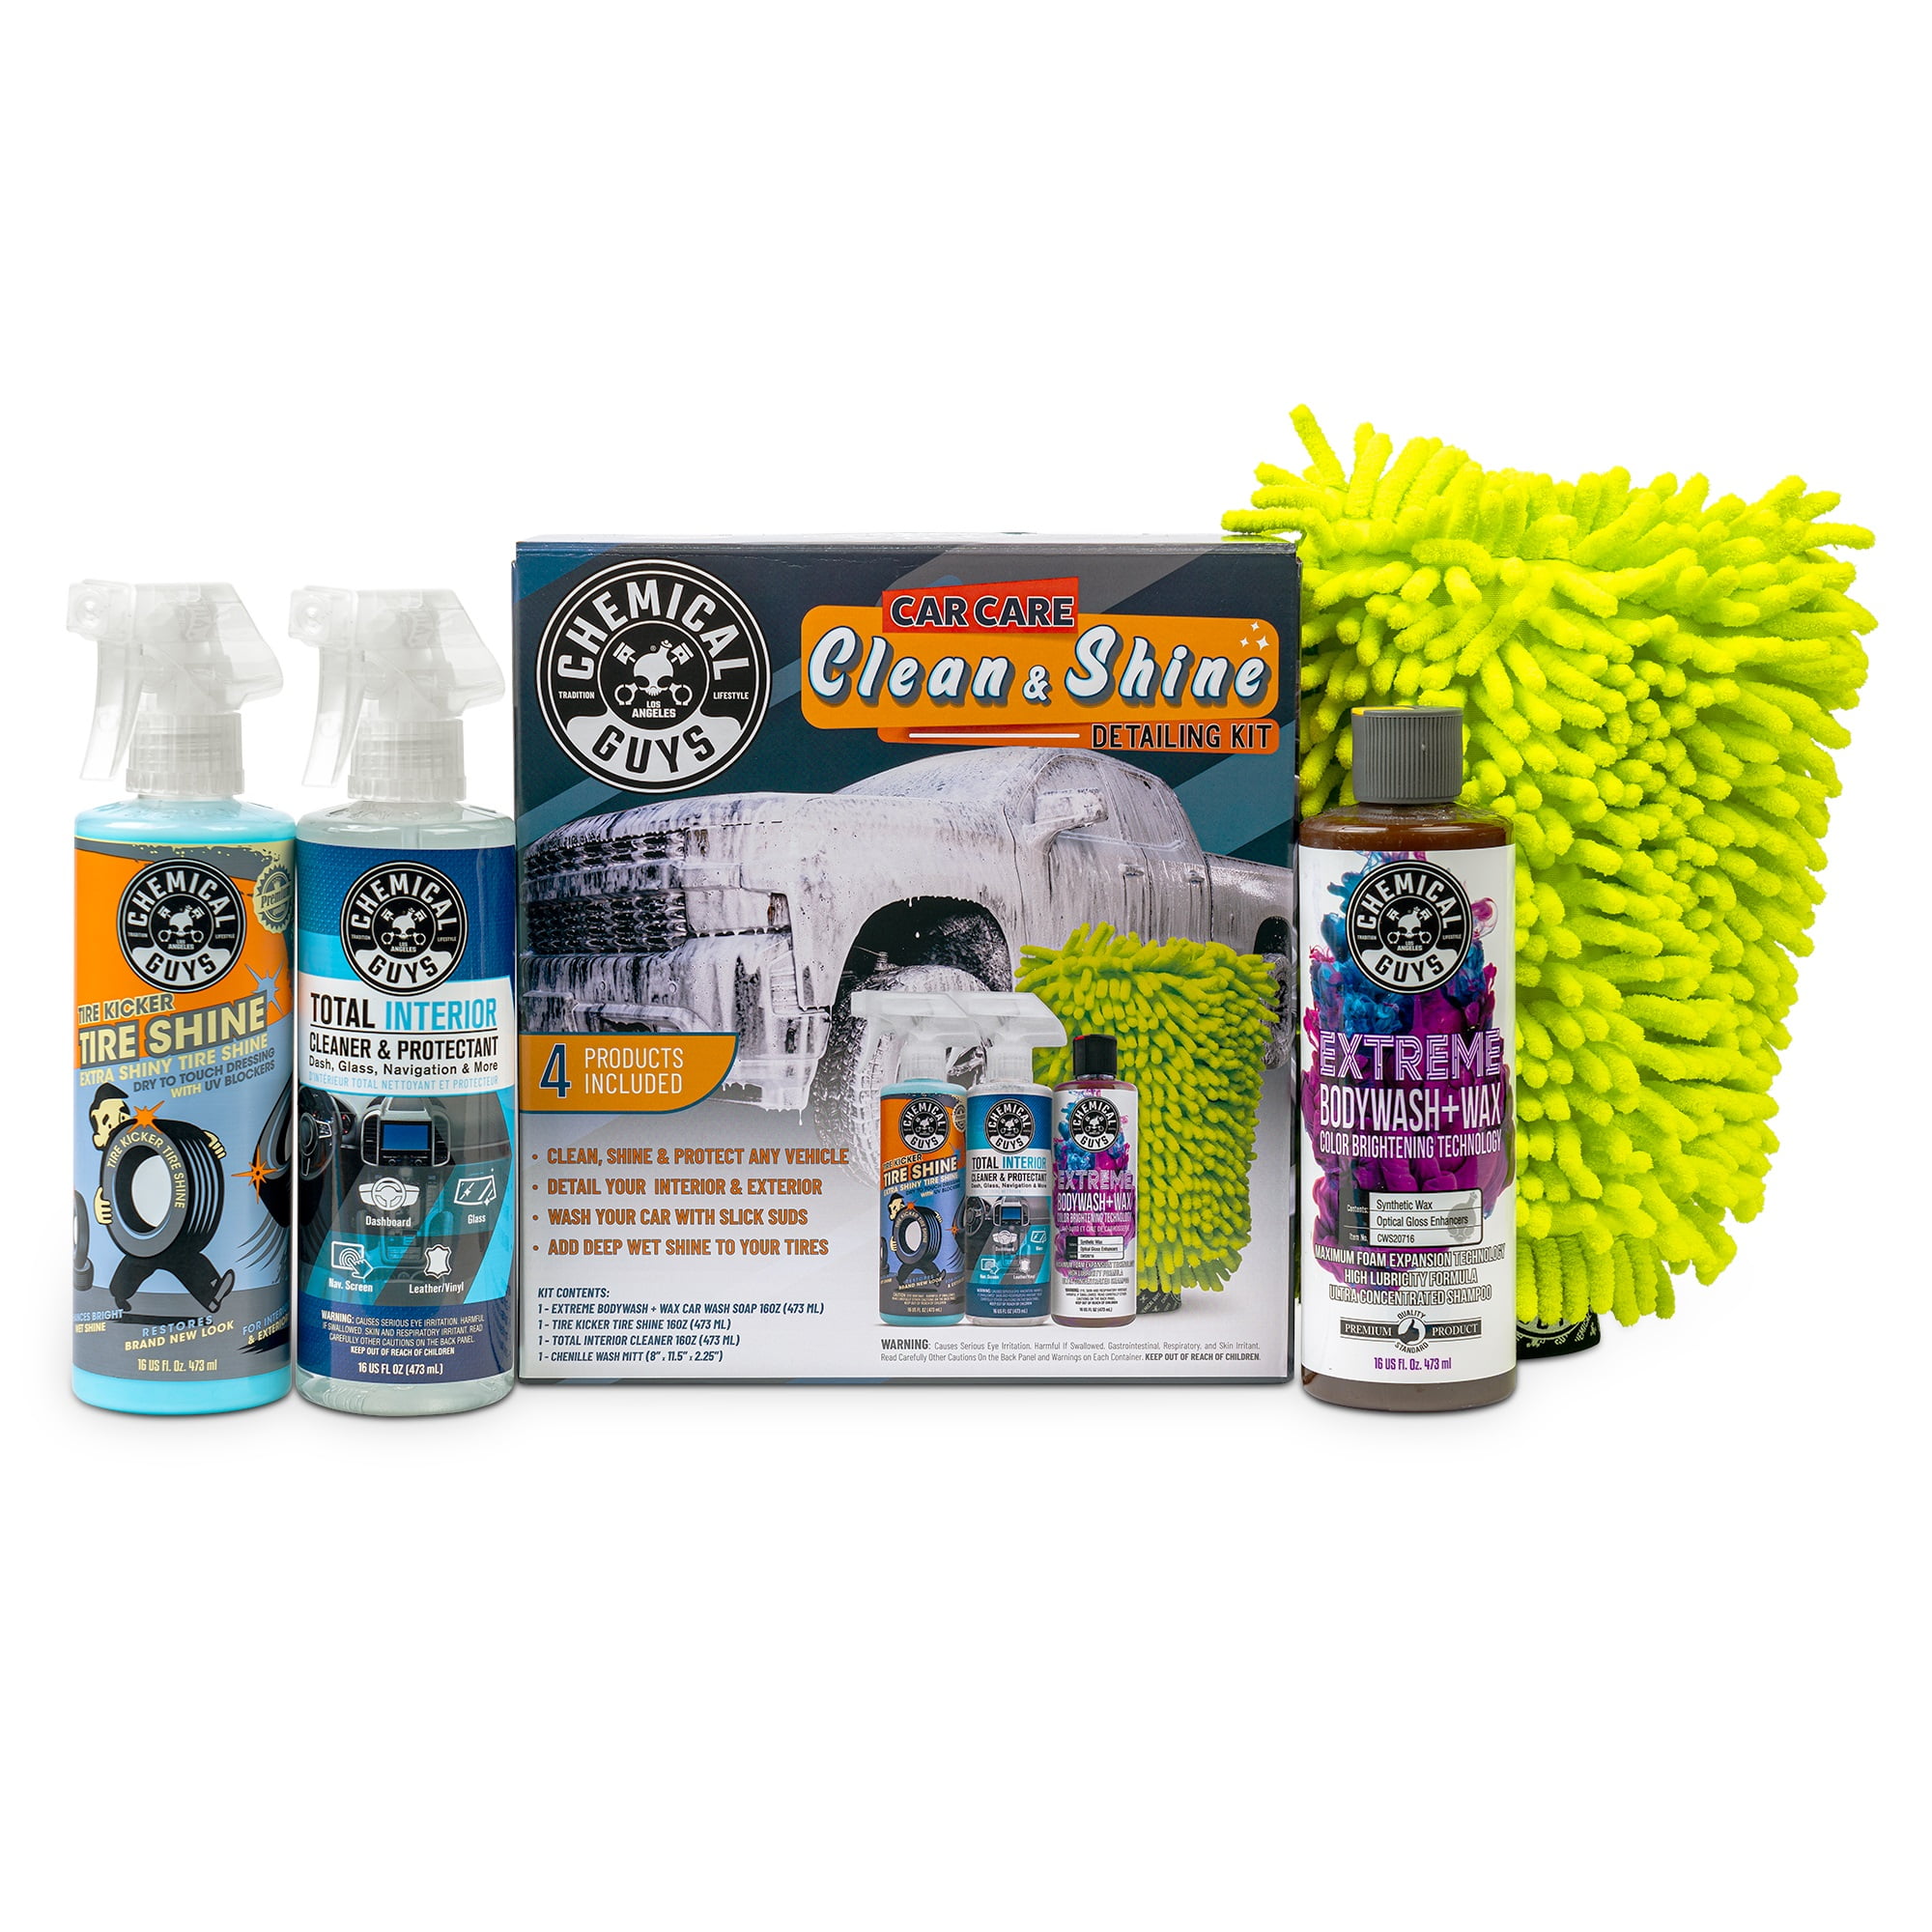 This Chemical Guys 11-piece car wash kit is 40% off at Walmart